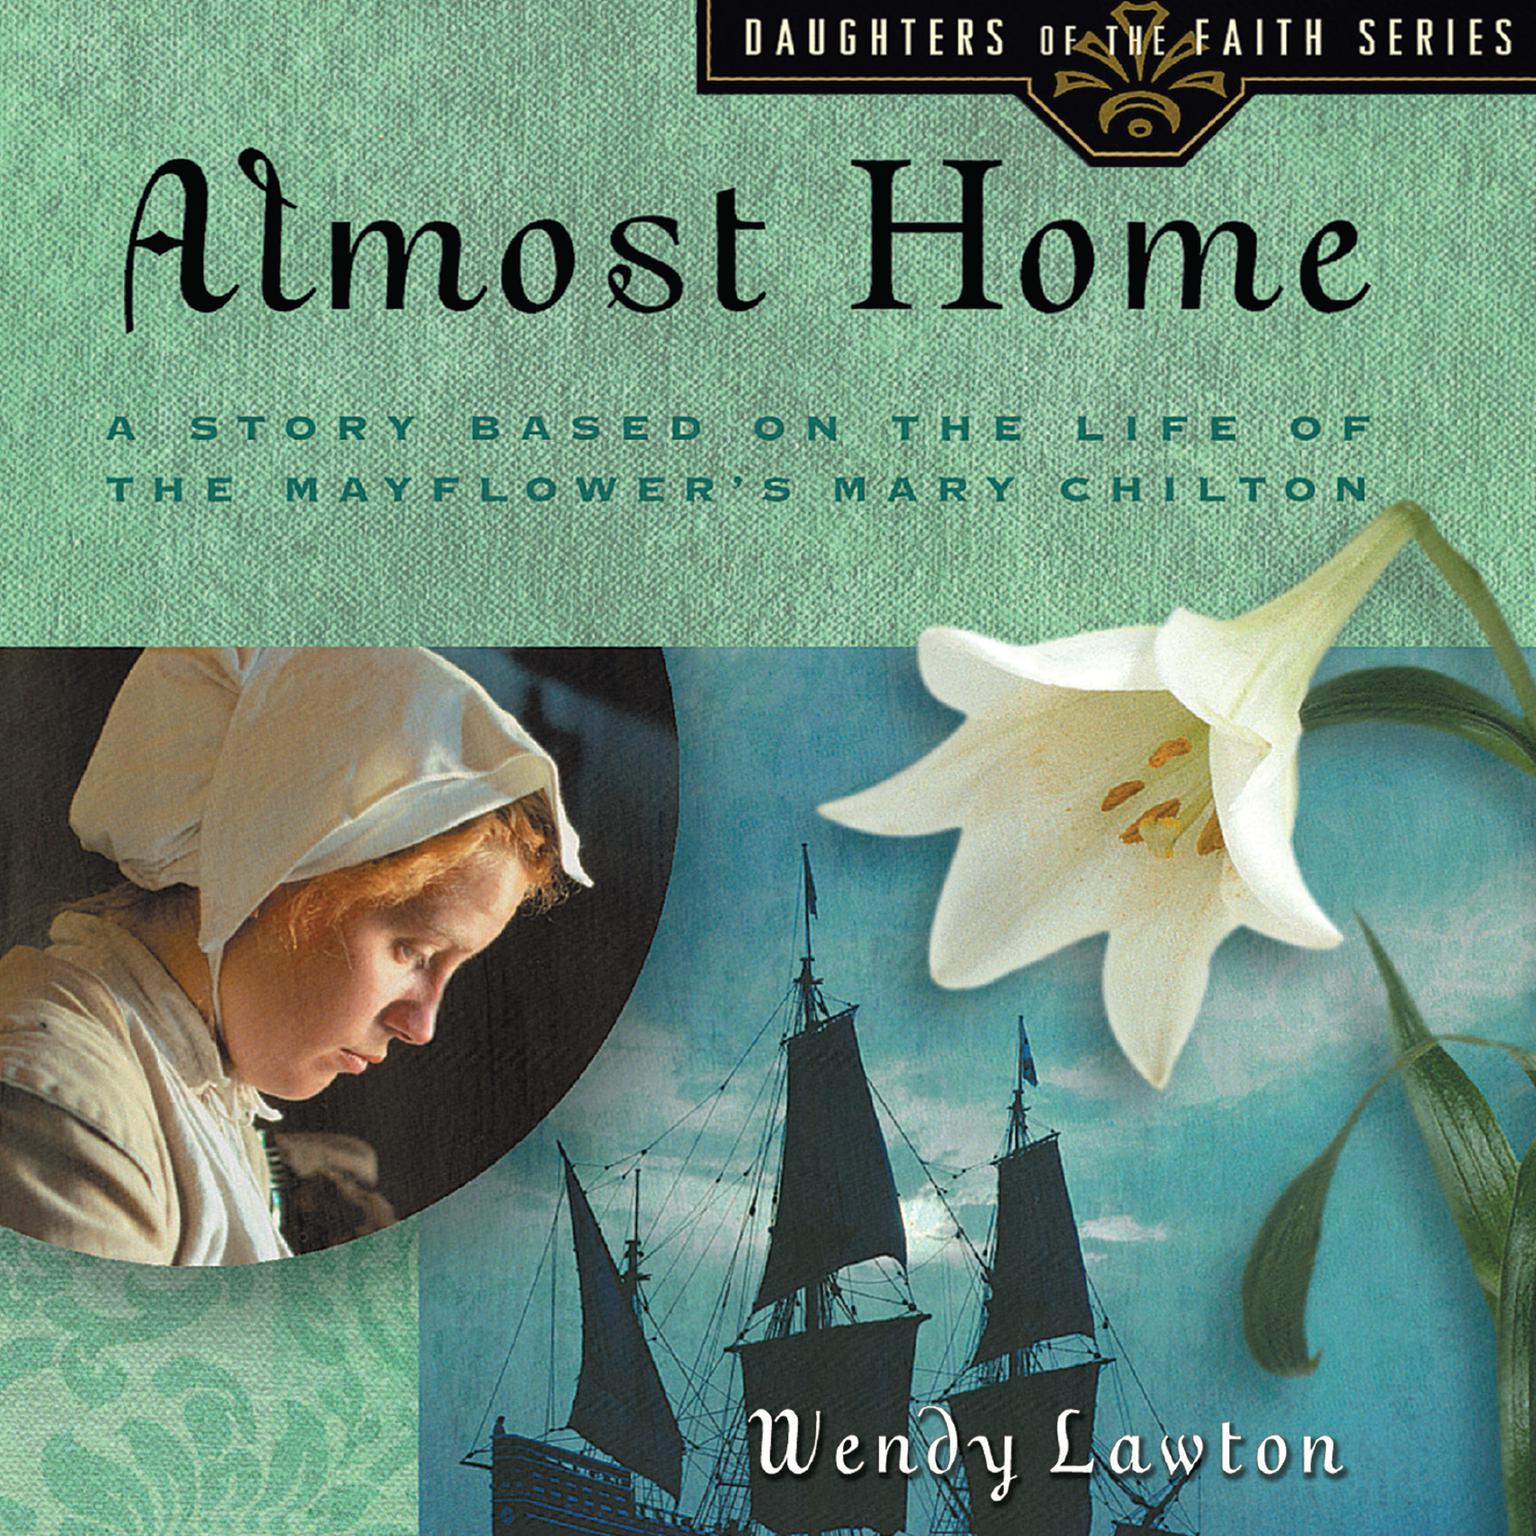 Almost Home: A Story Based on the Life of the Mayflowers Mary Chilton Audiobook, by Wendy Lawton